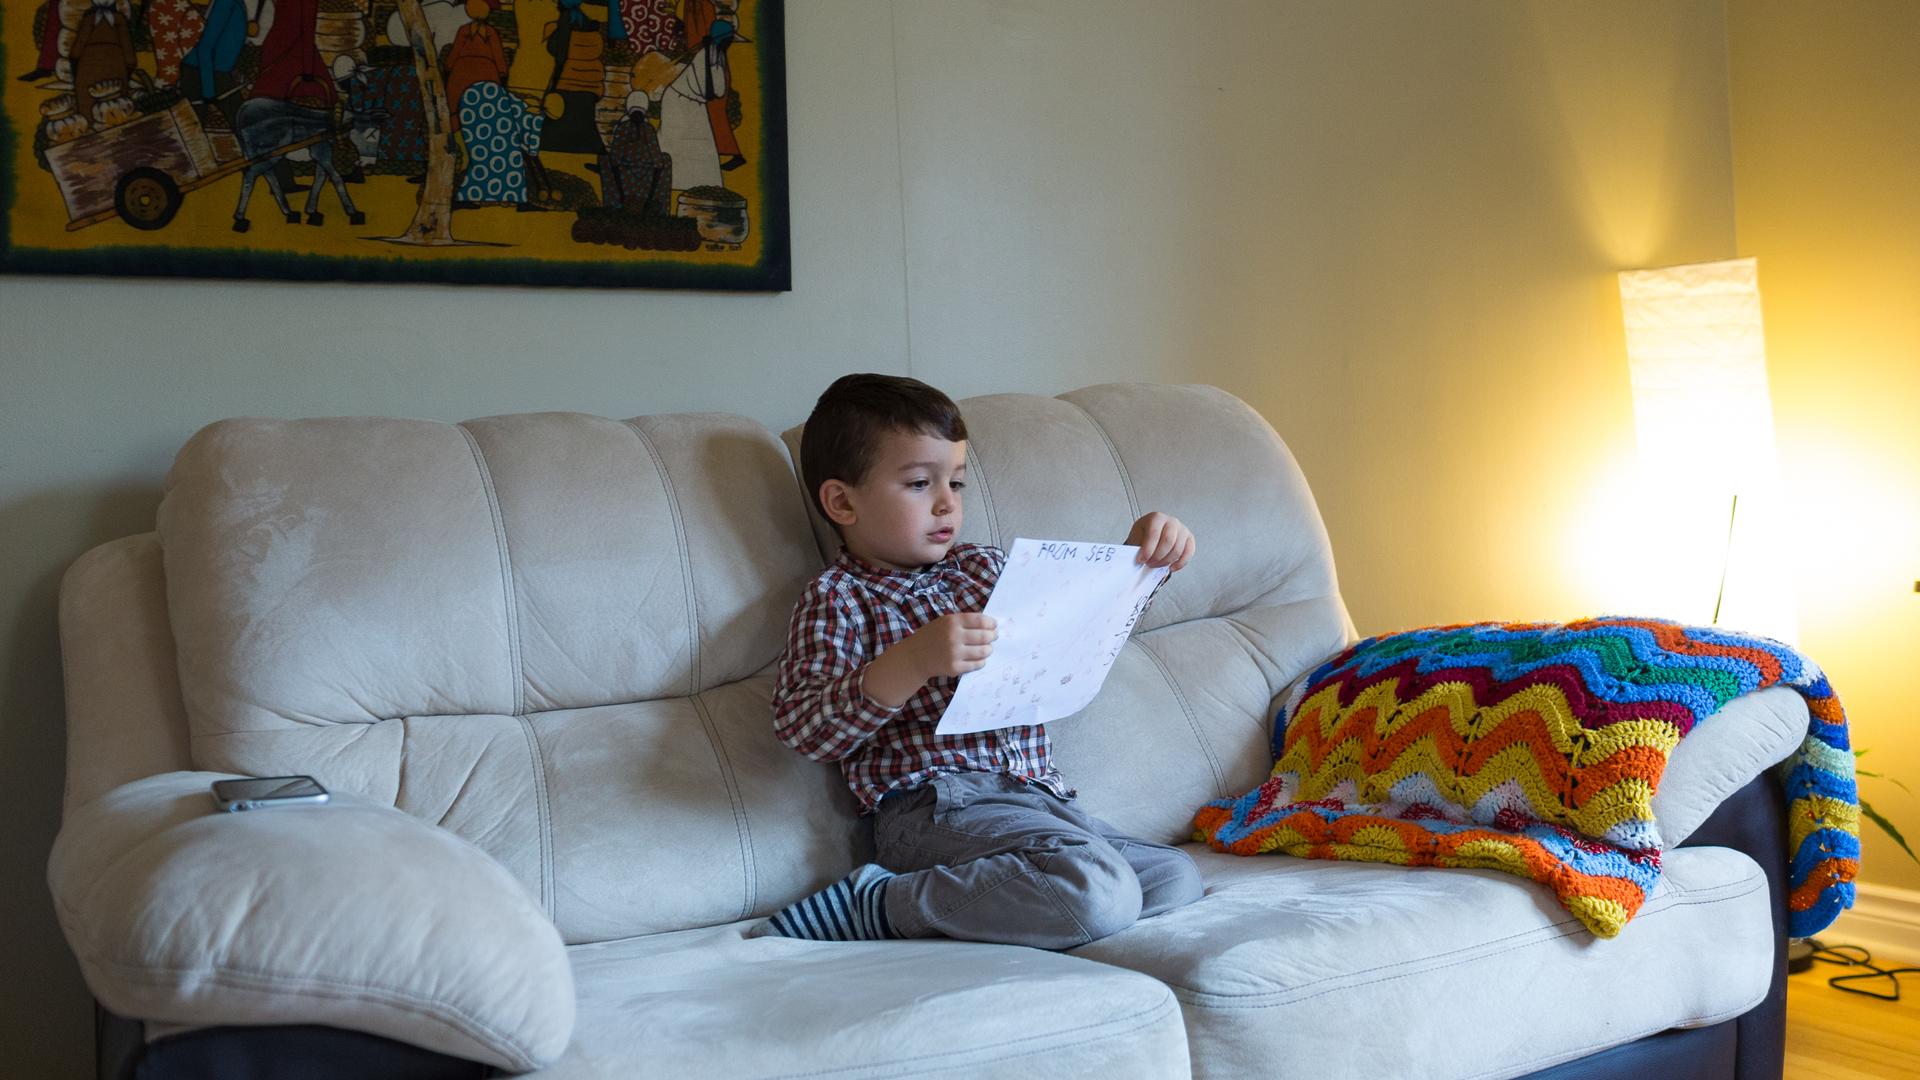 Boy sitting on cream sofa holding child's drawing, looking at it